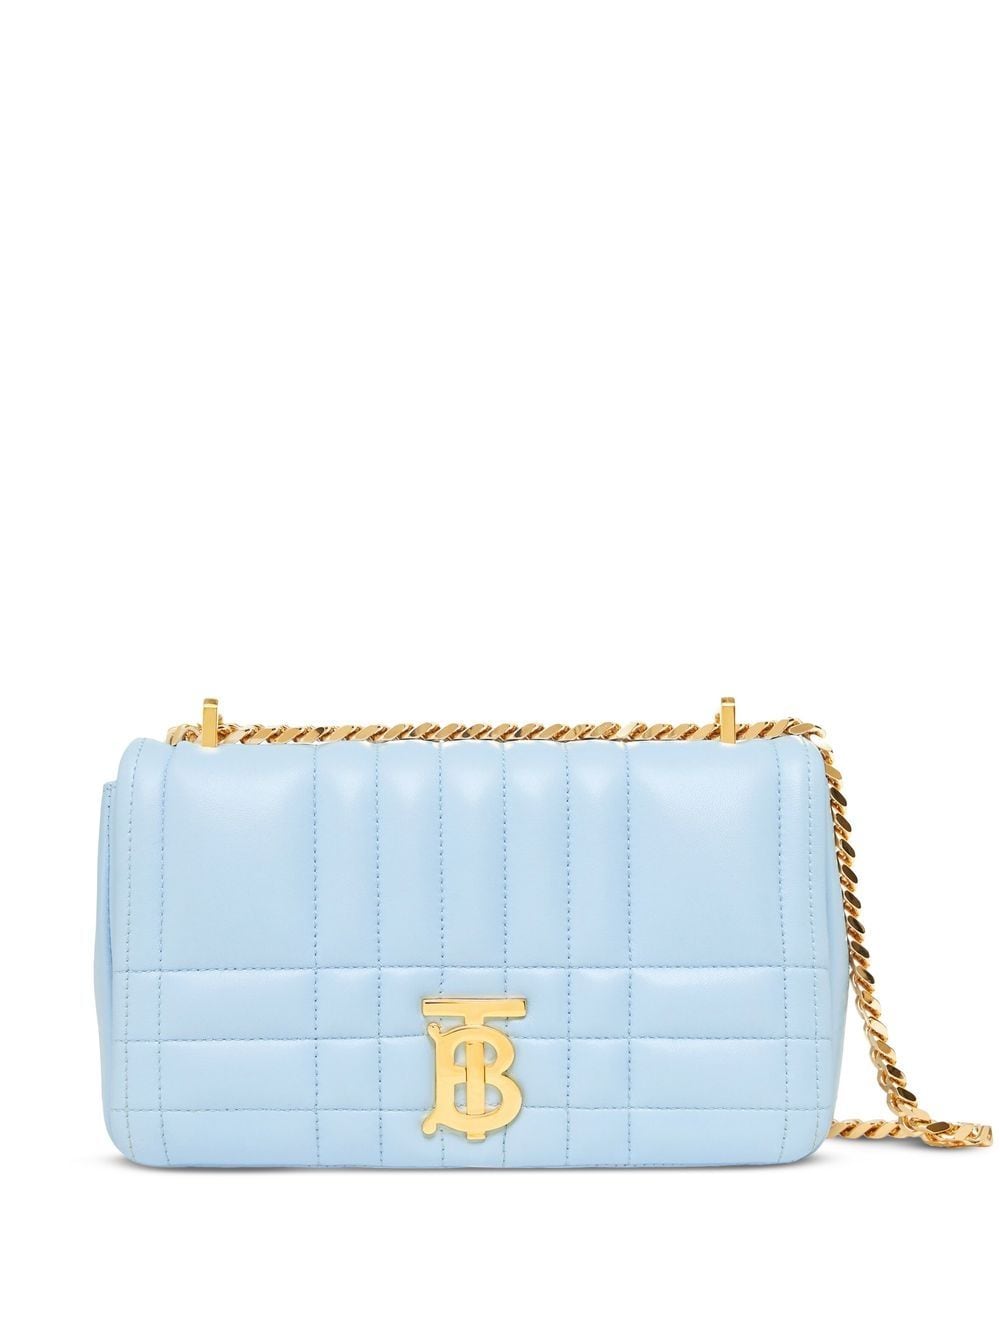 Burberry Lola Check Quilted Leather Shoulder Bag In Blue